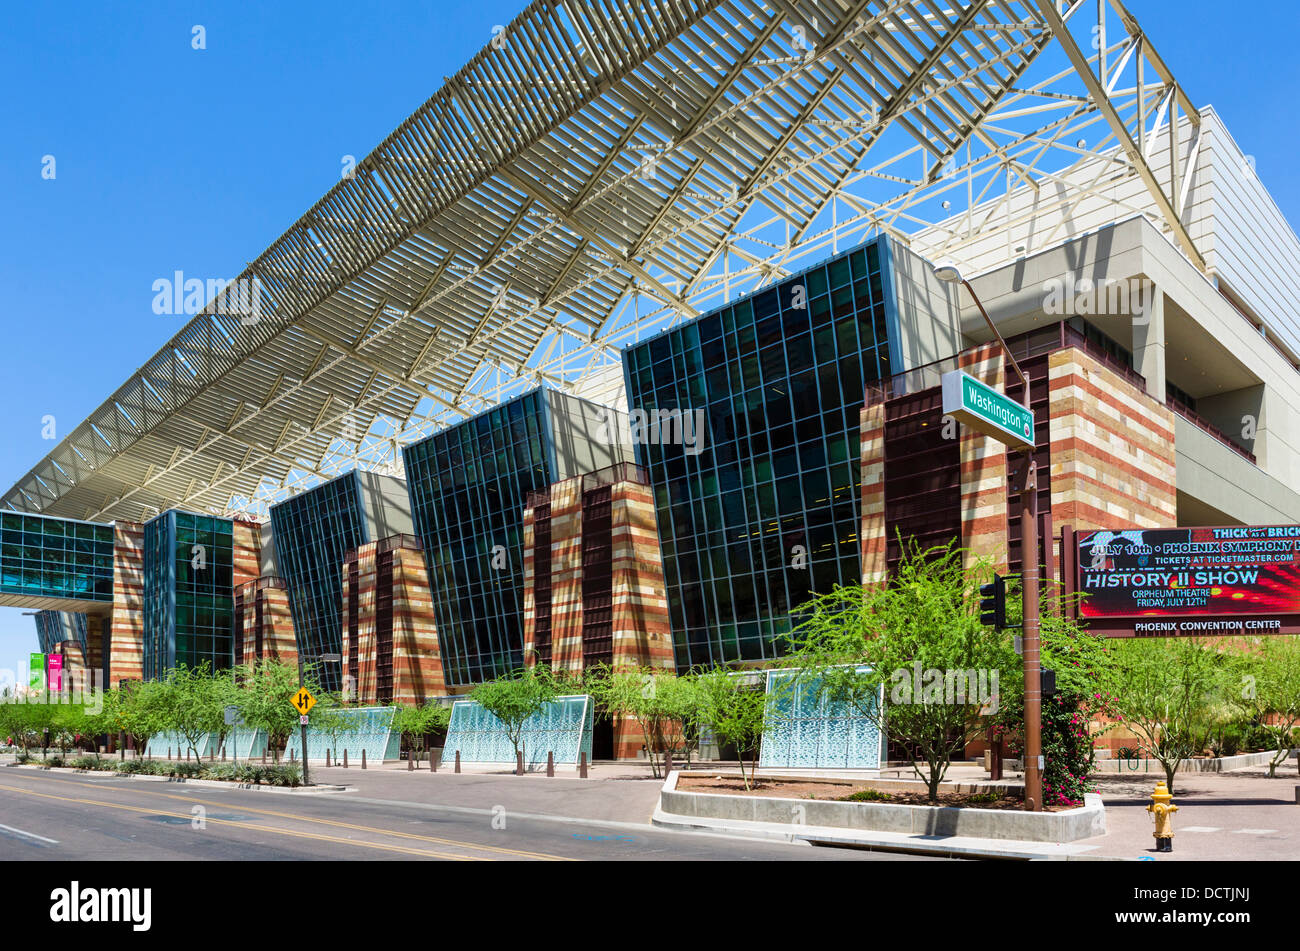 Phoenix Convention Center on N 3rd St in downtown Phoenix, Arizona, USA Stock Photo